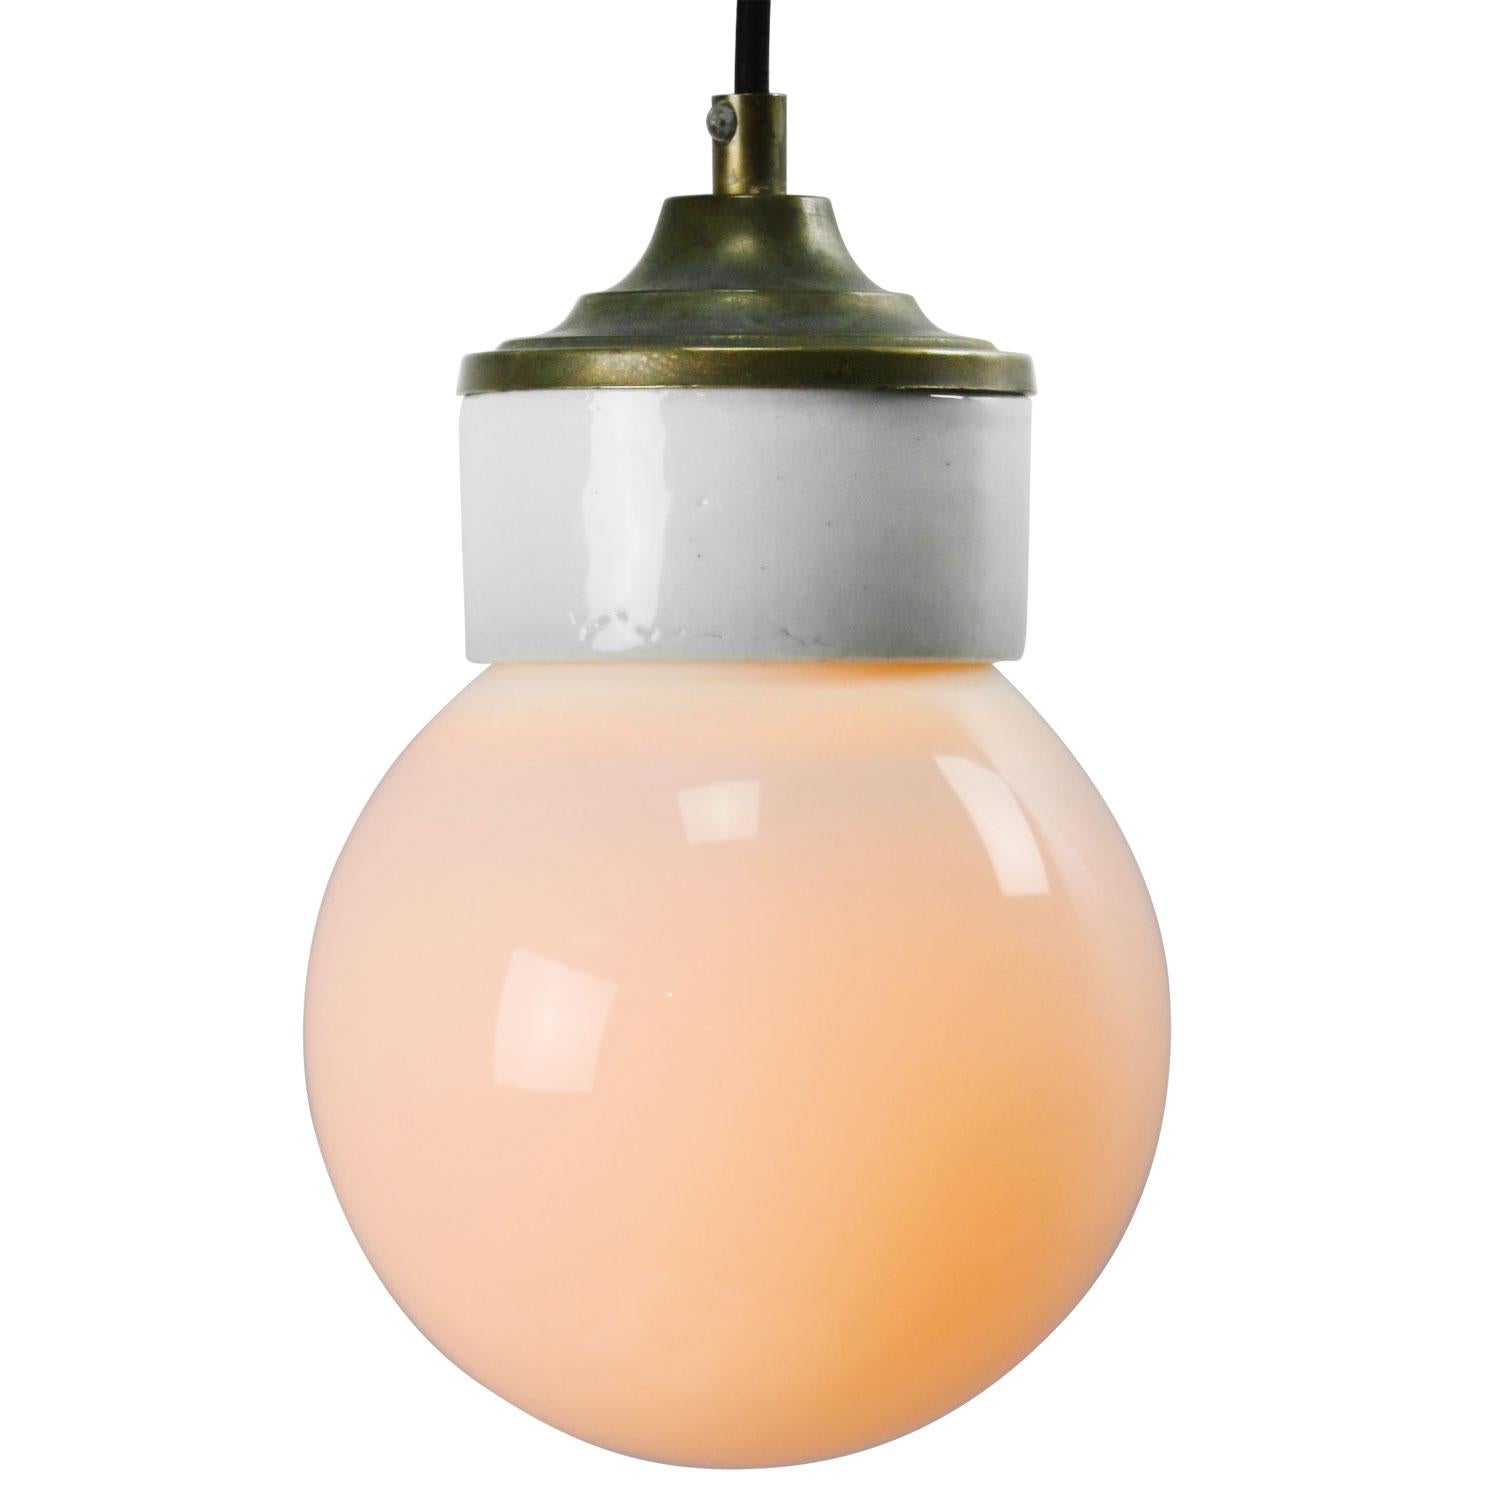 Porcelain industrial hanging lamp.
White porcelain, brass and clear glass.
2 conductors, no ground.

Weight: 1.20 kg / 2.6 lb

Priced per individual item. All lamps have been made suitable by international standards for incandescent light bulbs,